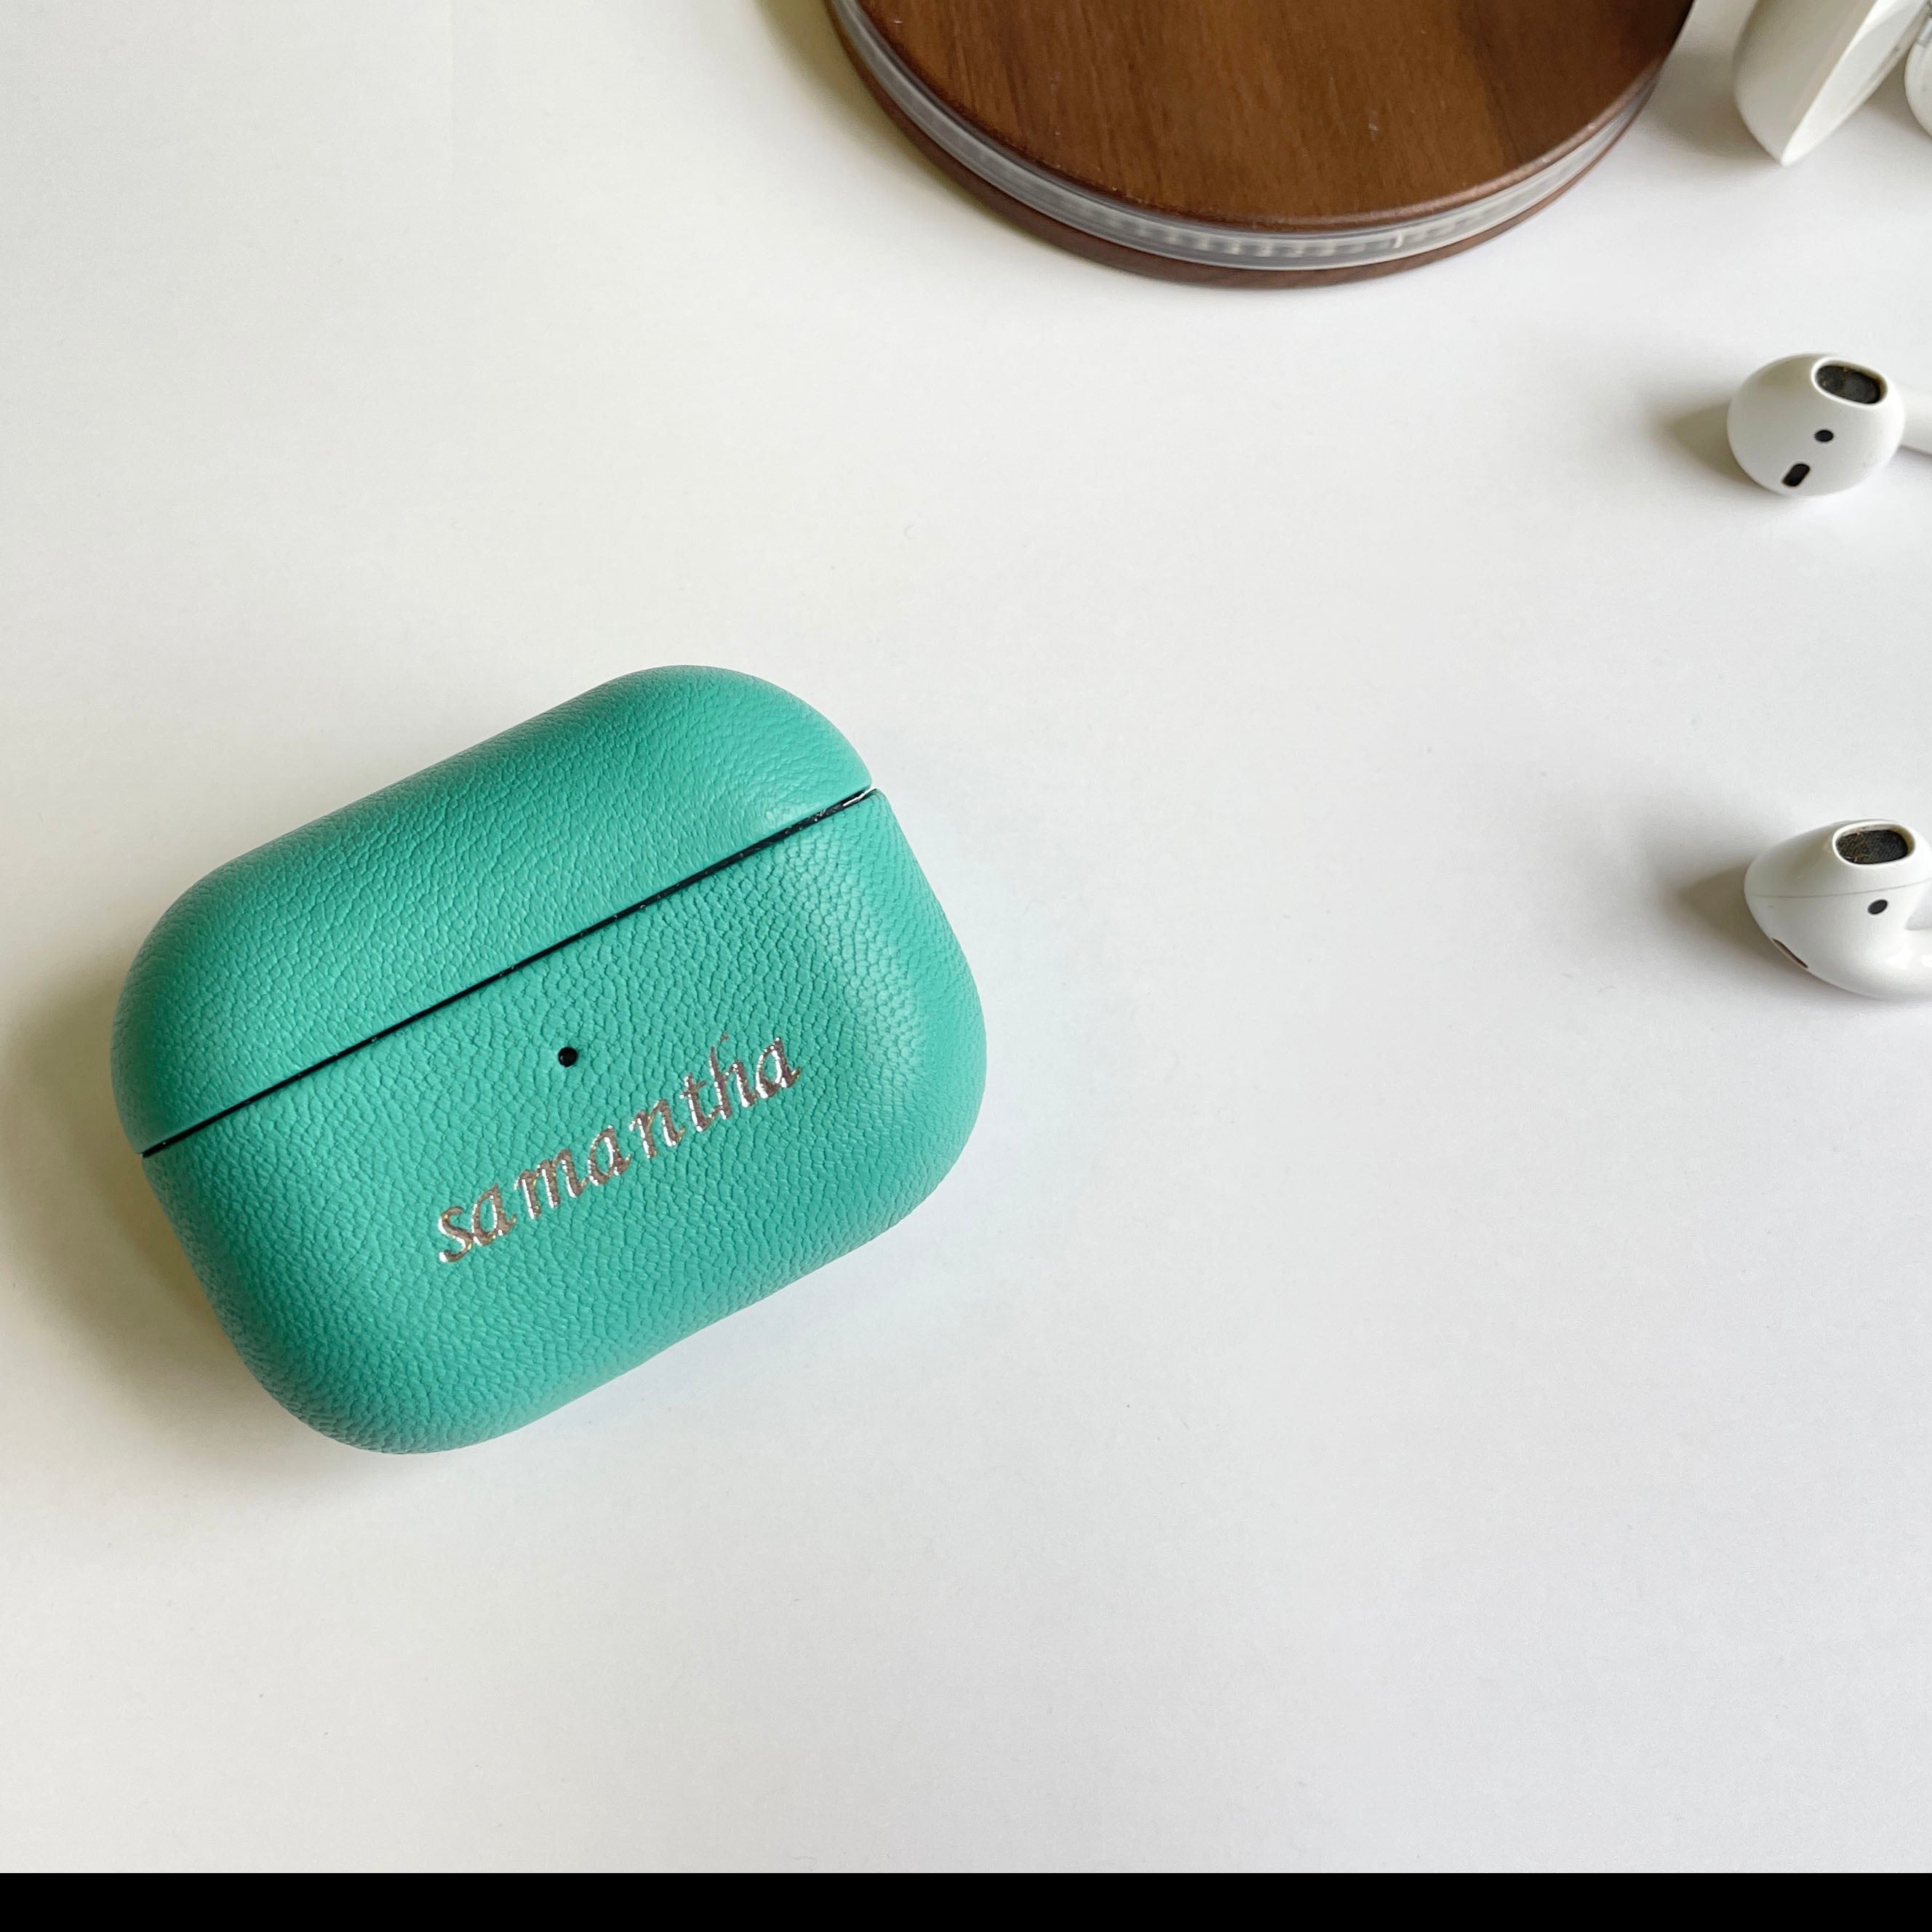 Tiffany Leather AirPod Case with personalized